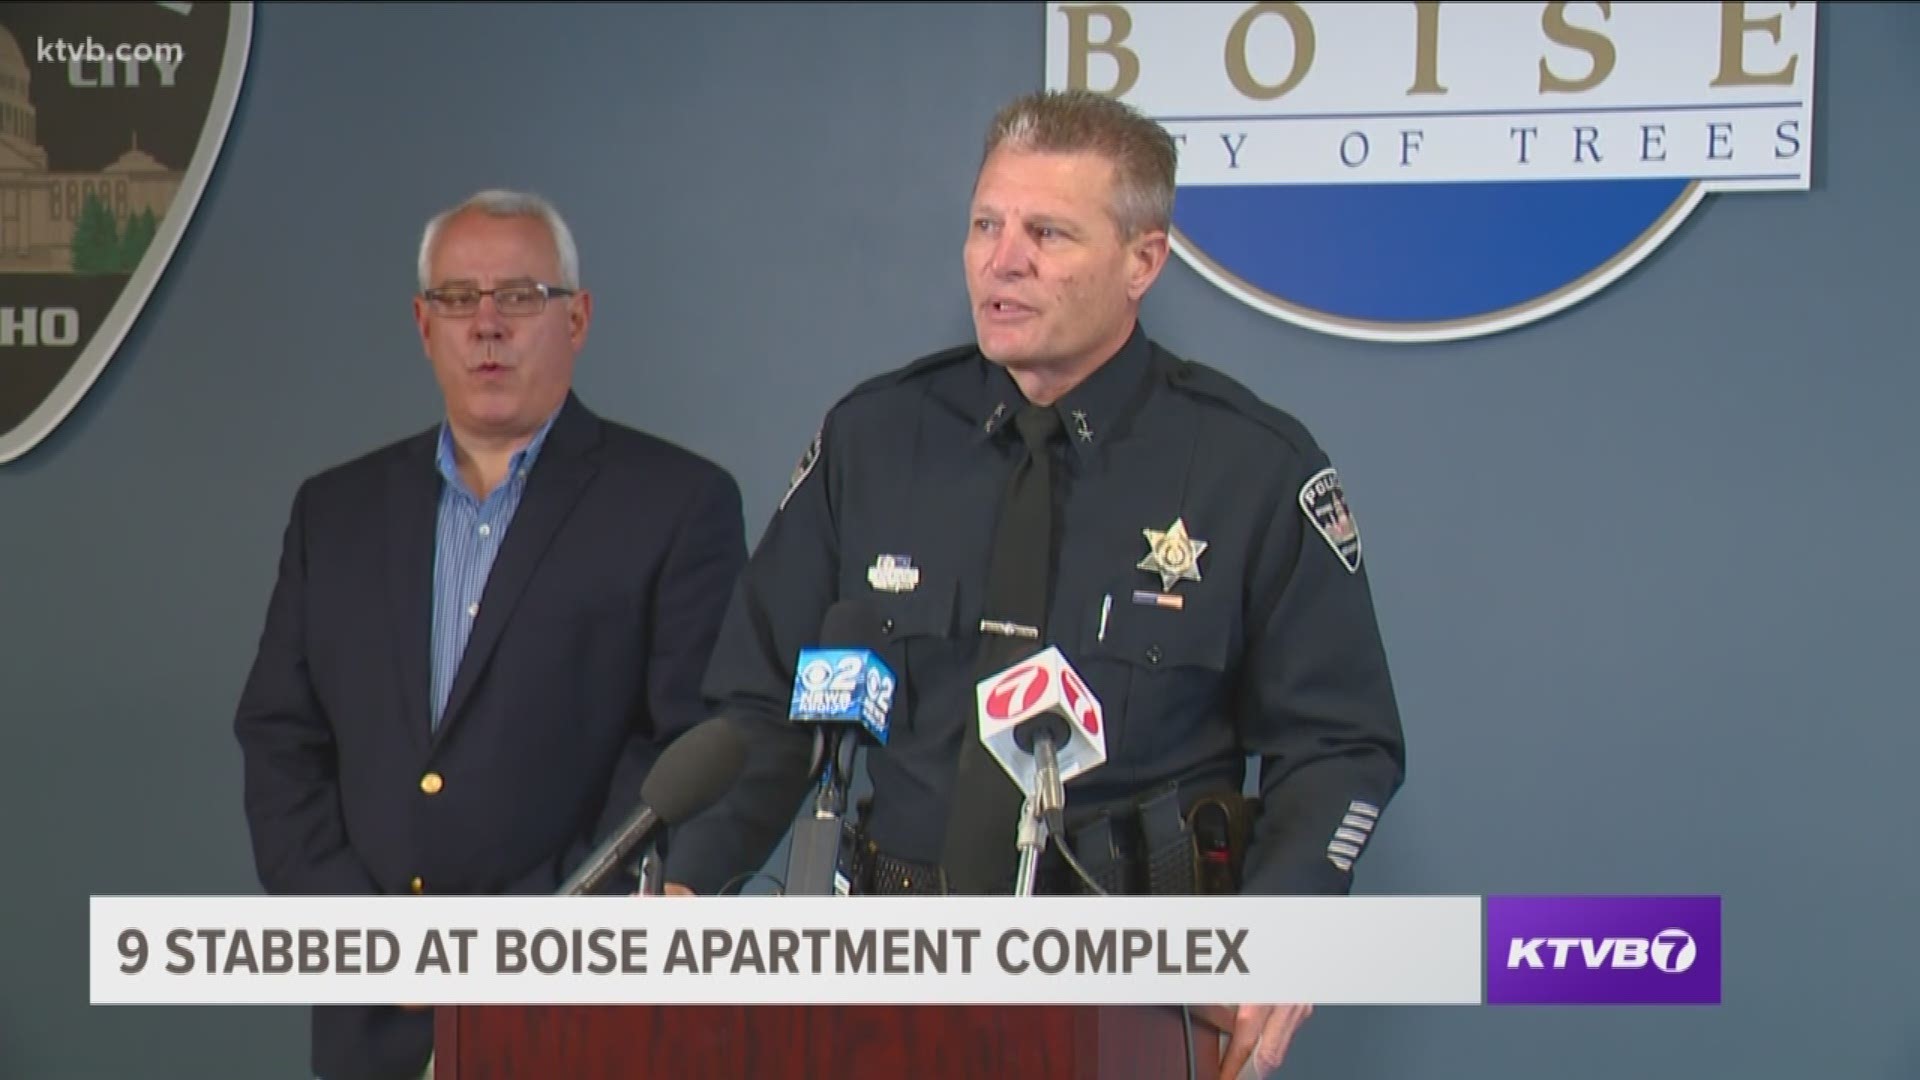 Boise police Chief Bill Bones and Boise Mayor Dave Bieter speak to the media after a 30-year-old suspect Timmy Kinner stabbed nine people, including children, at the Wylie Street Station Apartment Complex. Many of the victims are refugees.